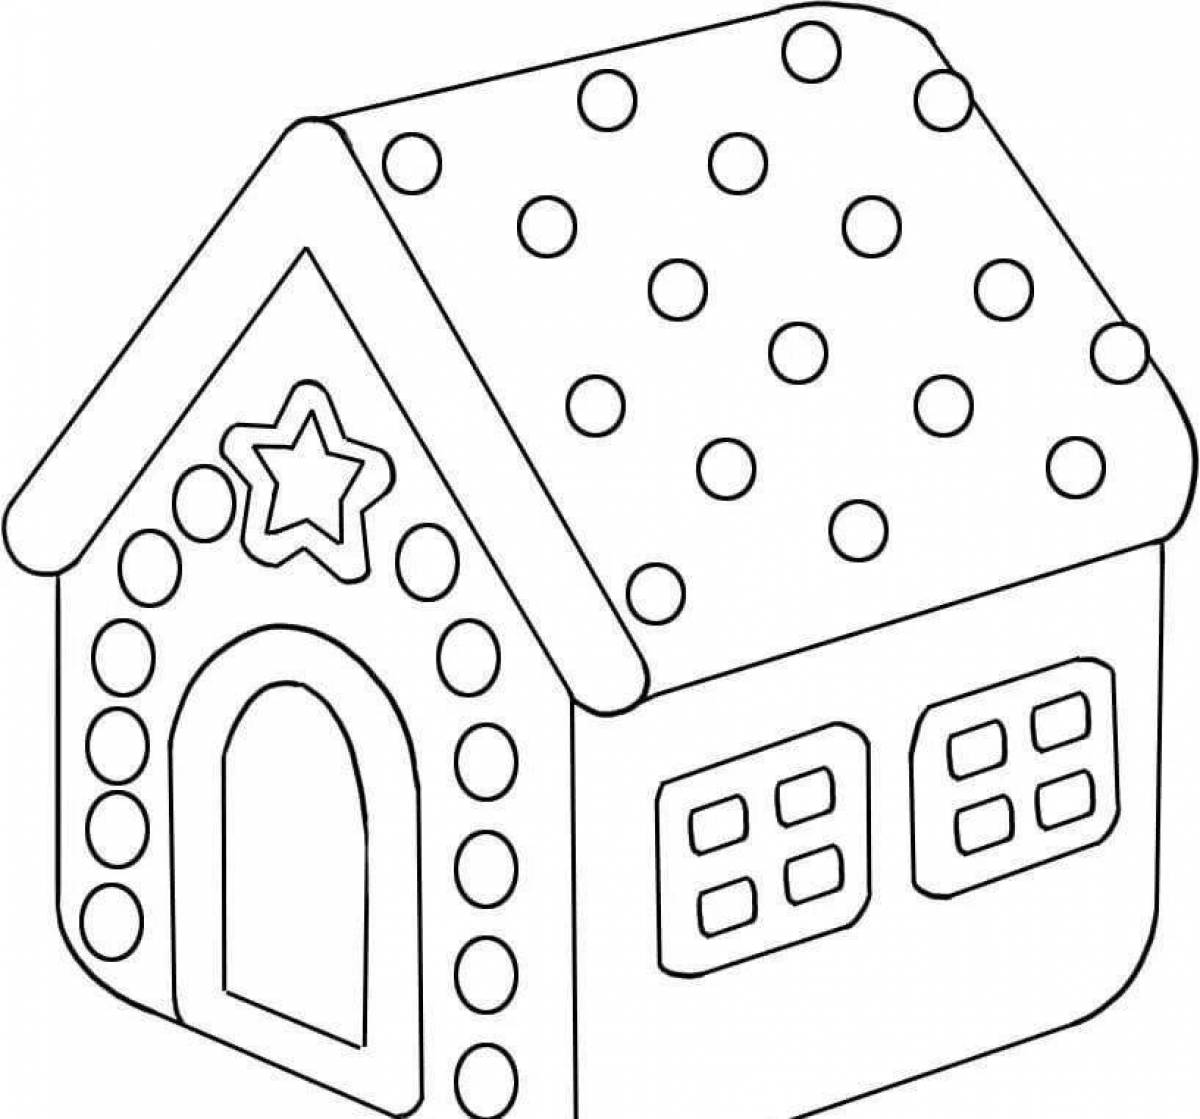 Colourful coloring house for children 3-4 years old